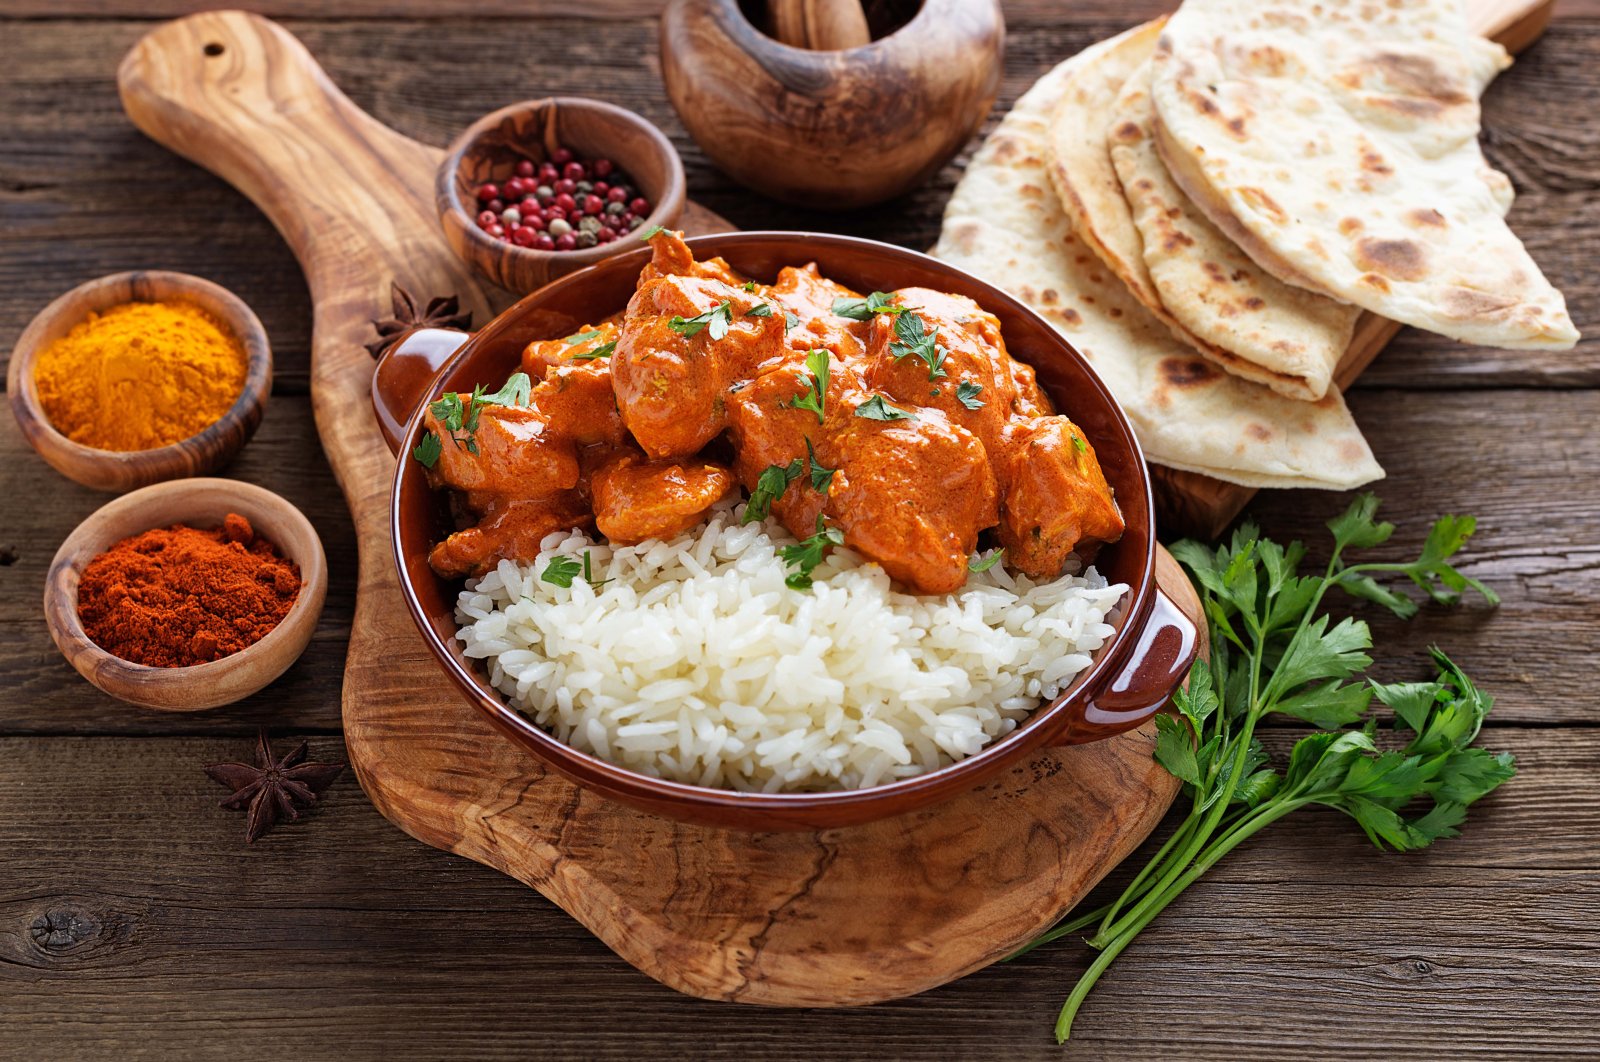 Chicken tikka masala dish with rice and naan bread in an undated photo. (Shutterstock File Photo)